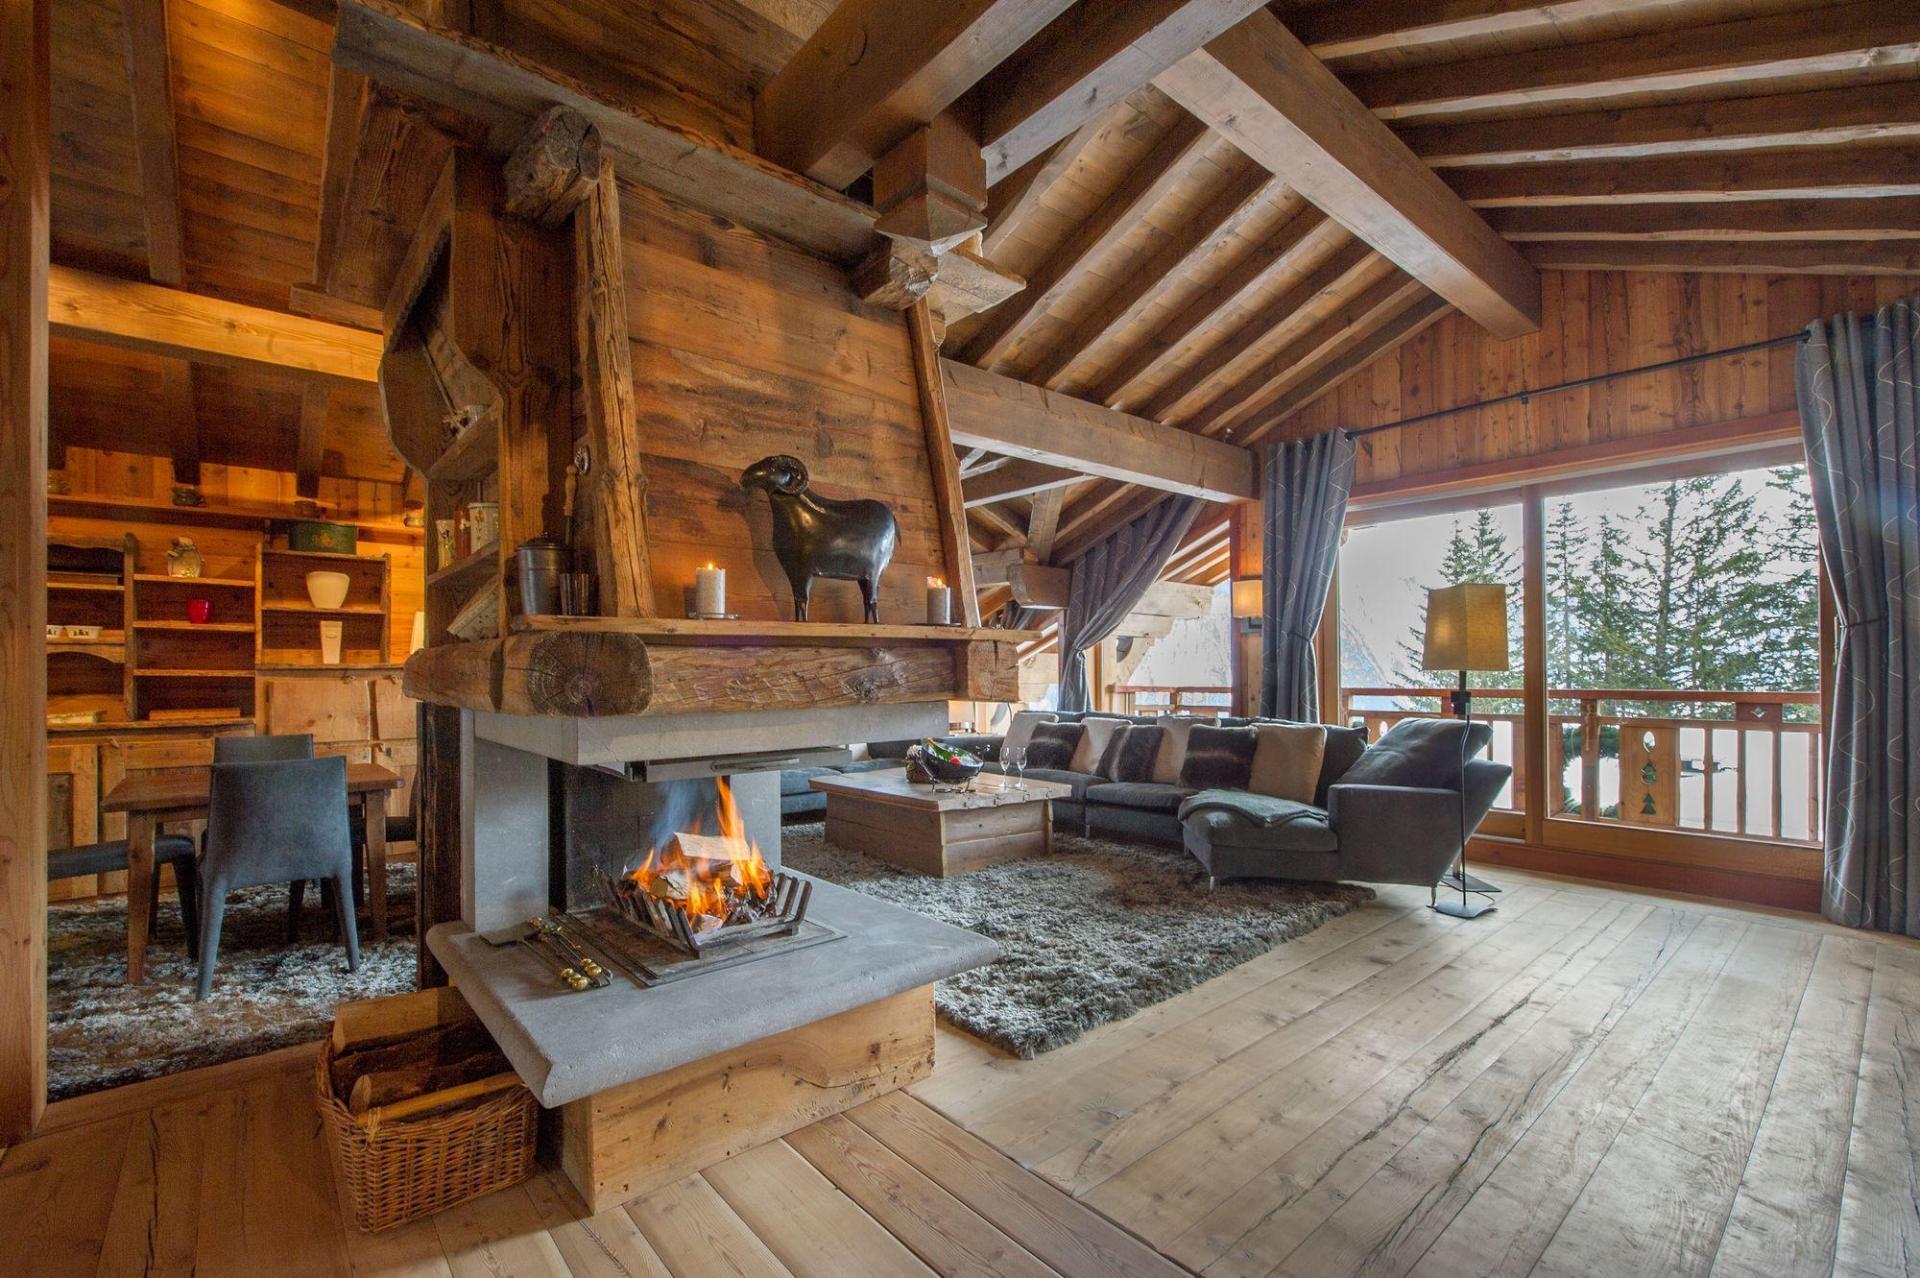 THE FIREPLACE IN CHALET DES SAPINS